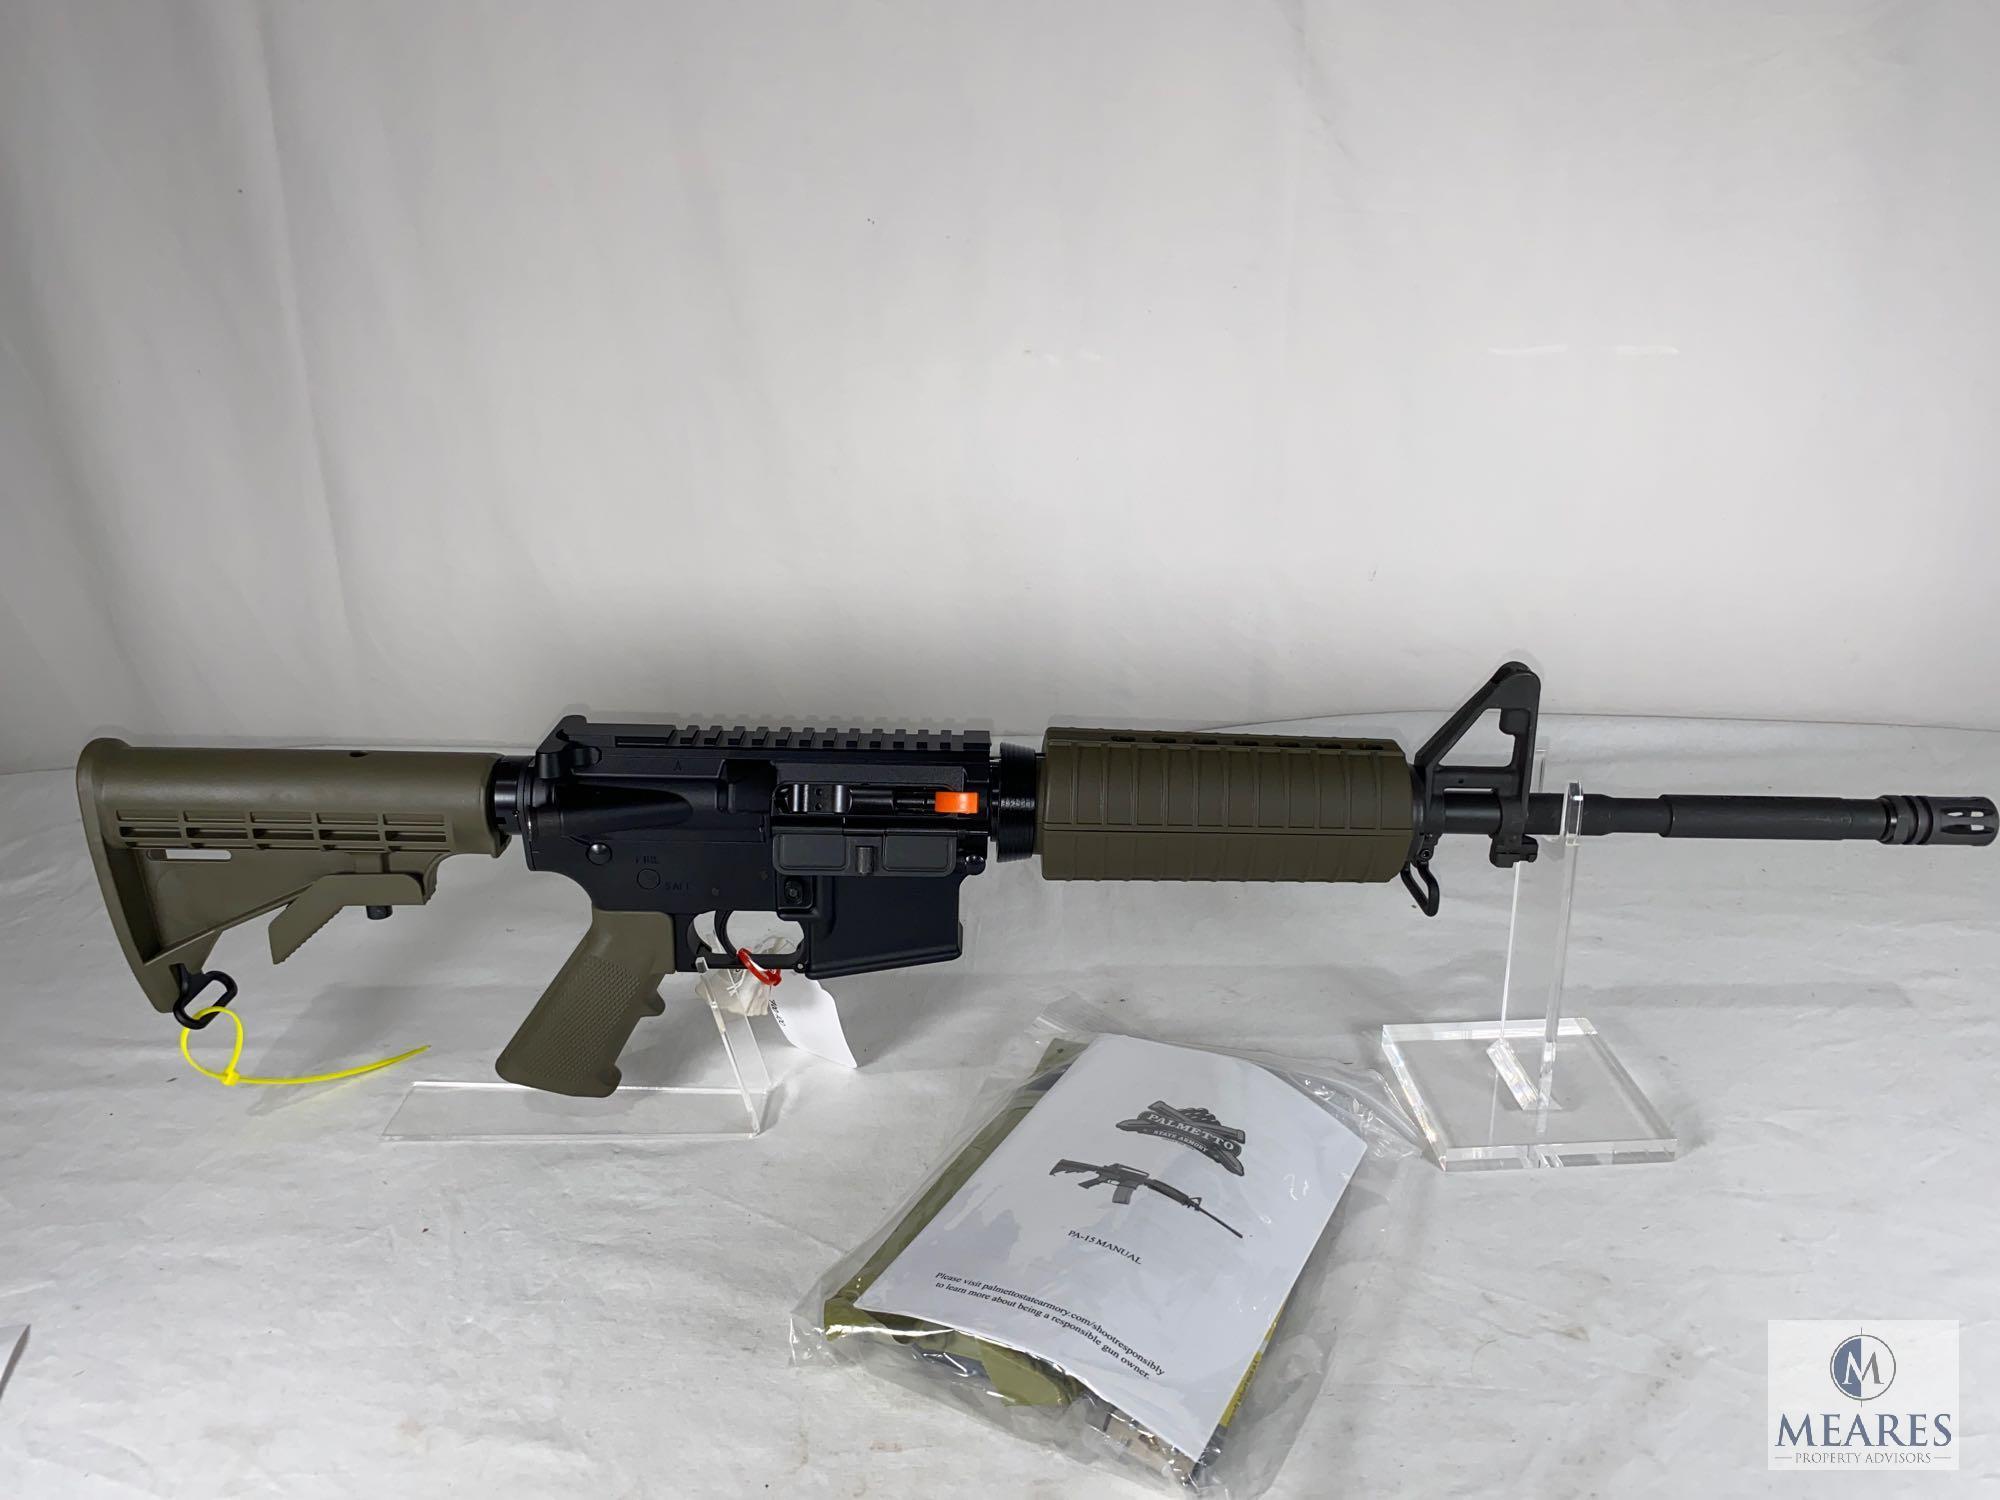 NEW IN THE BOX! PSA PA-15 16" M4 PHOSPHATE 5.56 NATO 1/7 CLASSIC RIFLE, OLIVE DRAB GREEN